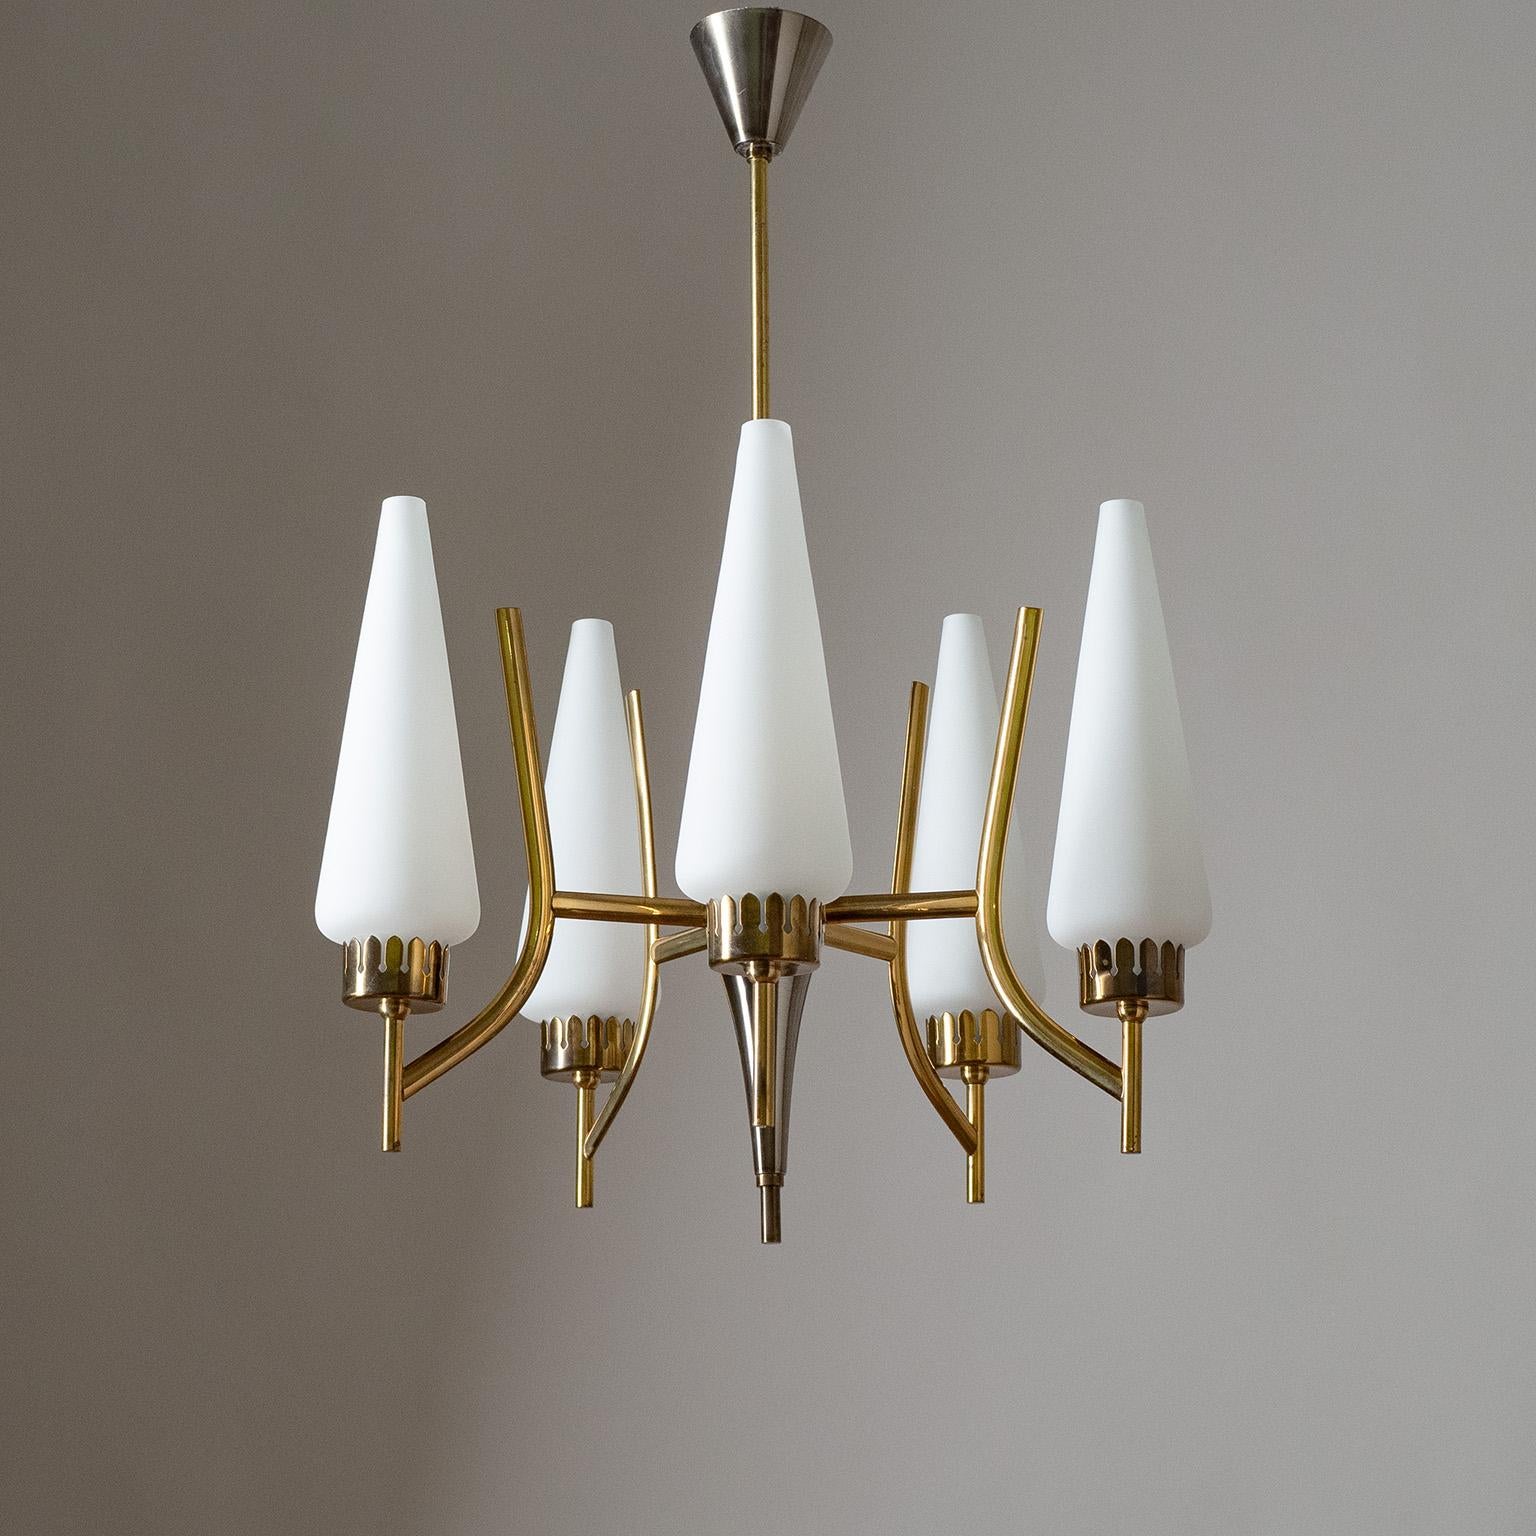 Fine mid-century Italian chandelier from the 1950-1960s. Intricate rive-arm brass construction with aluminum parts lacquered in gun-metal grey and slender satin glass diffusers. Nice original condition with a light patina on the brass and some wear